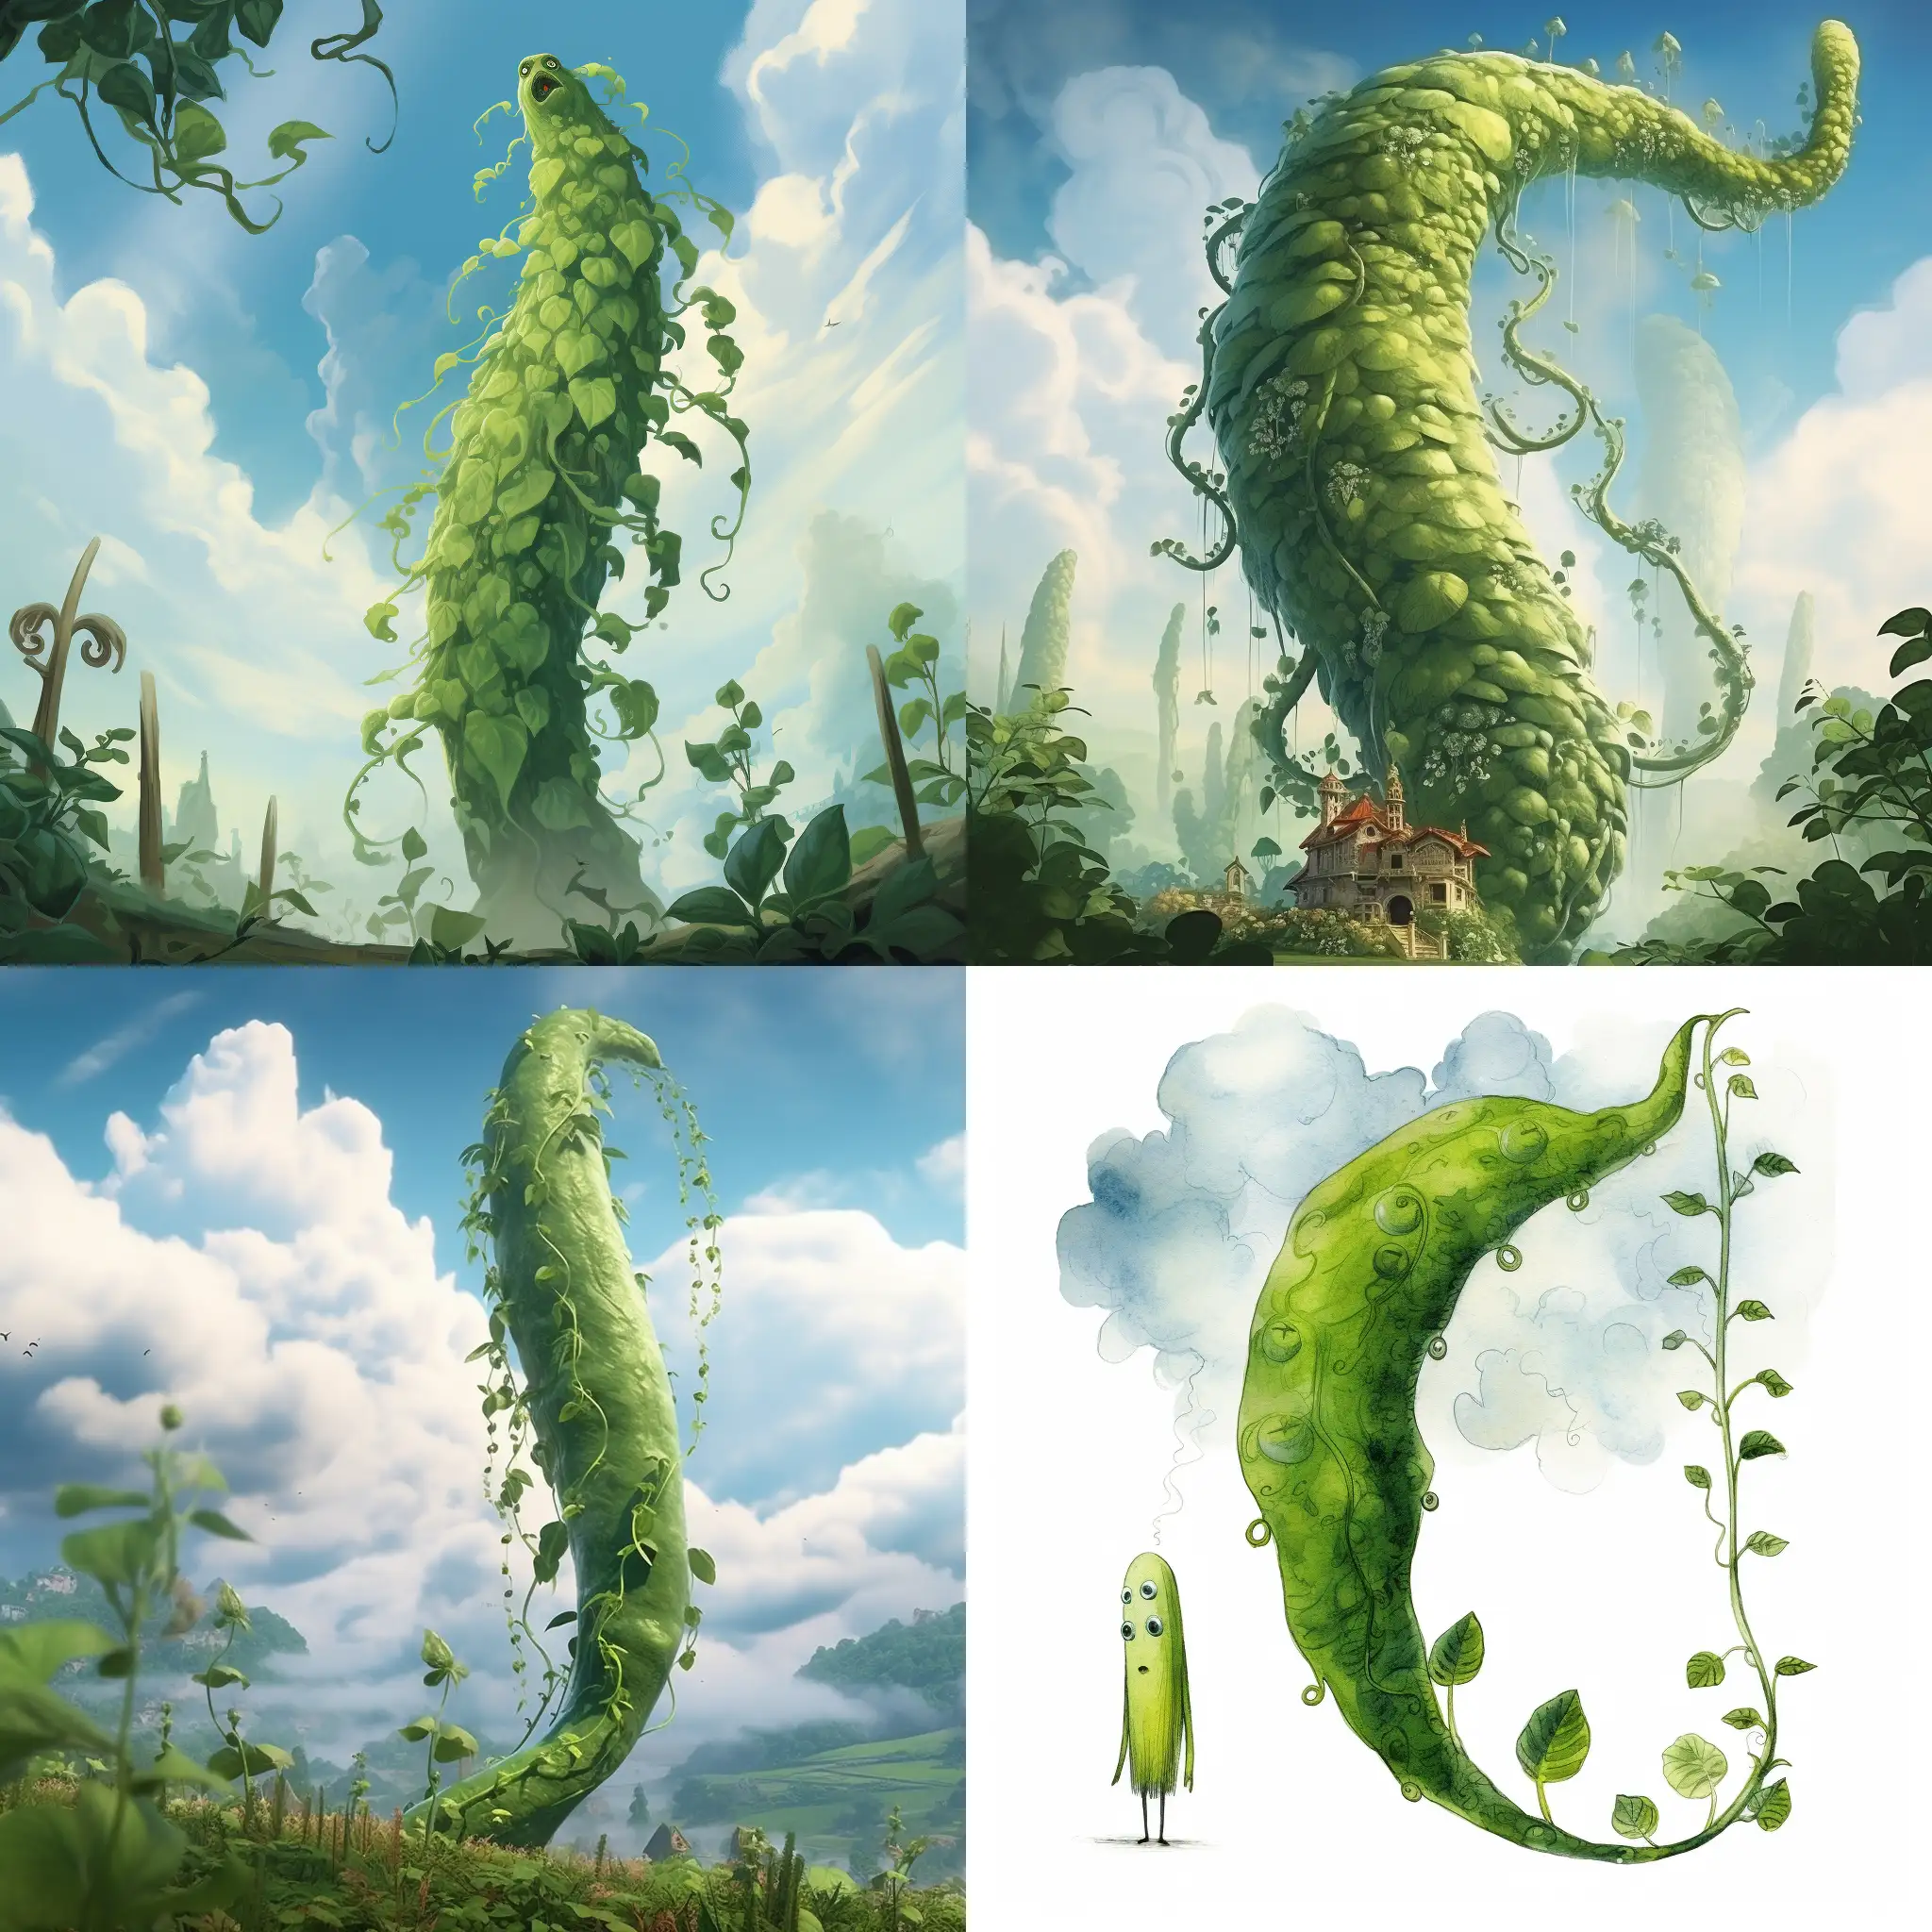 Imagine Příběhoun as a tall bean-like creature with a soft shade of green. Its body could have a texture reminiscent of old books, and a beanstalk-like crest would twirl like a vine with a few beans. Eyes might radiate a magical light, and gentle sparks would emanate from them while telling stories. Delicate clouds would surround its figure, symbolizing its connection with clouds and stories.